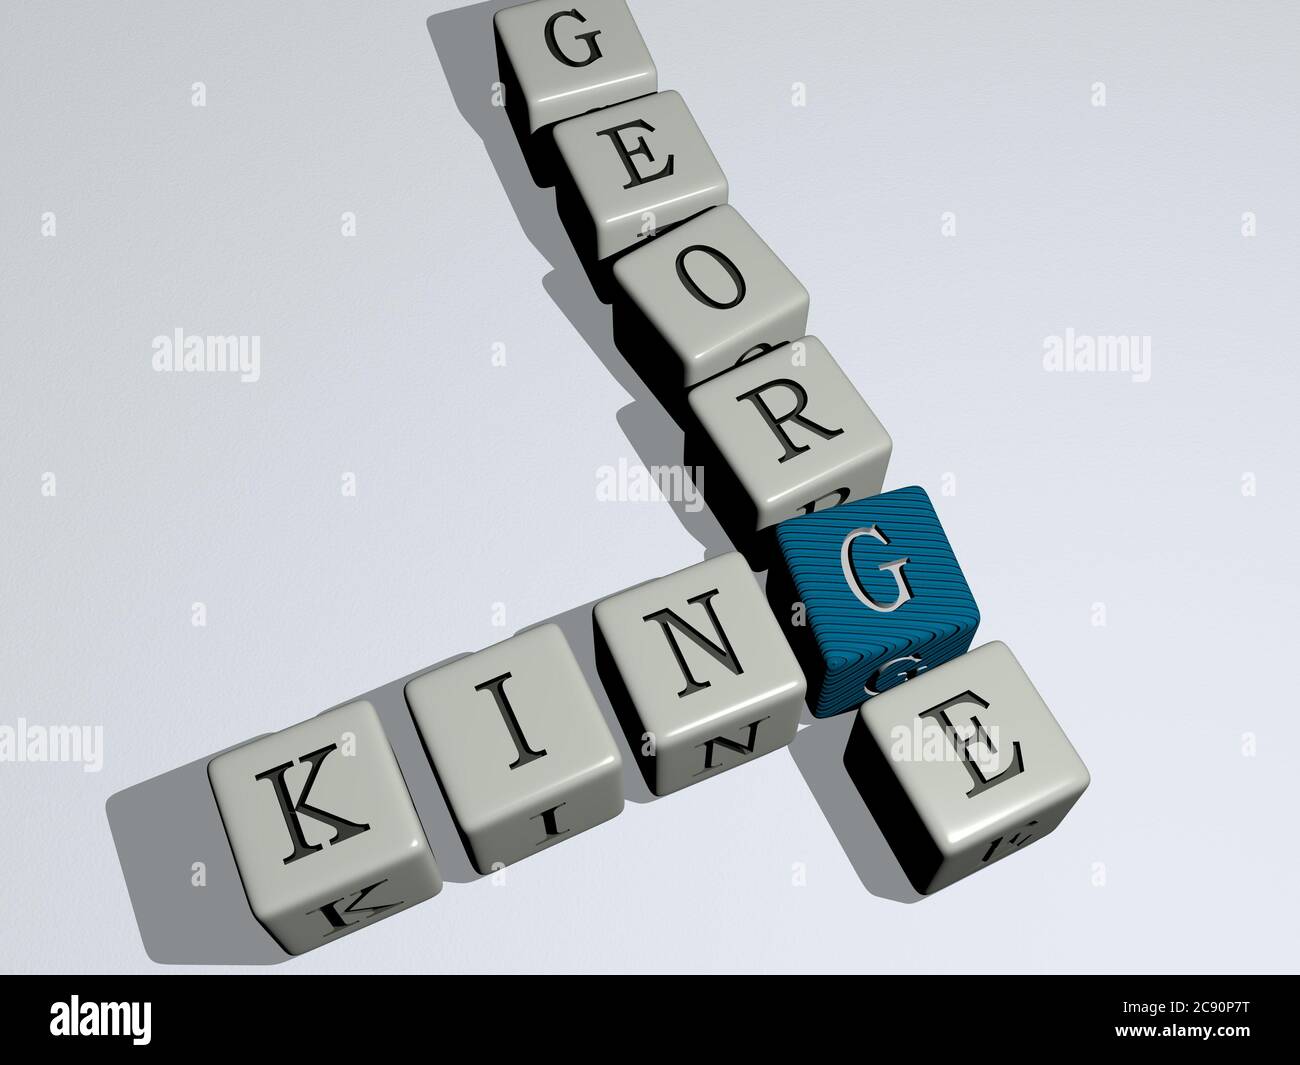 KING GEORGE combined by dice letters and color crossing for the related meanings of the concept. illustration and background. 3D illustration Stock Photo